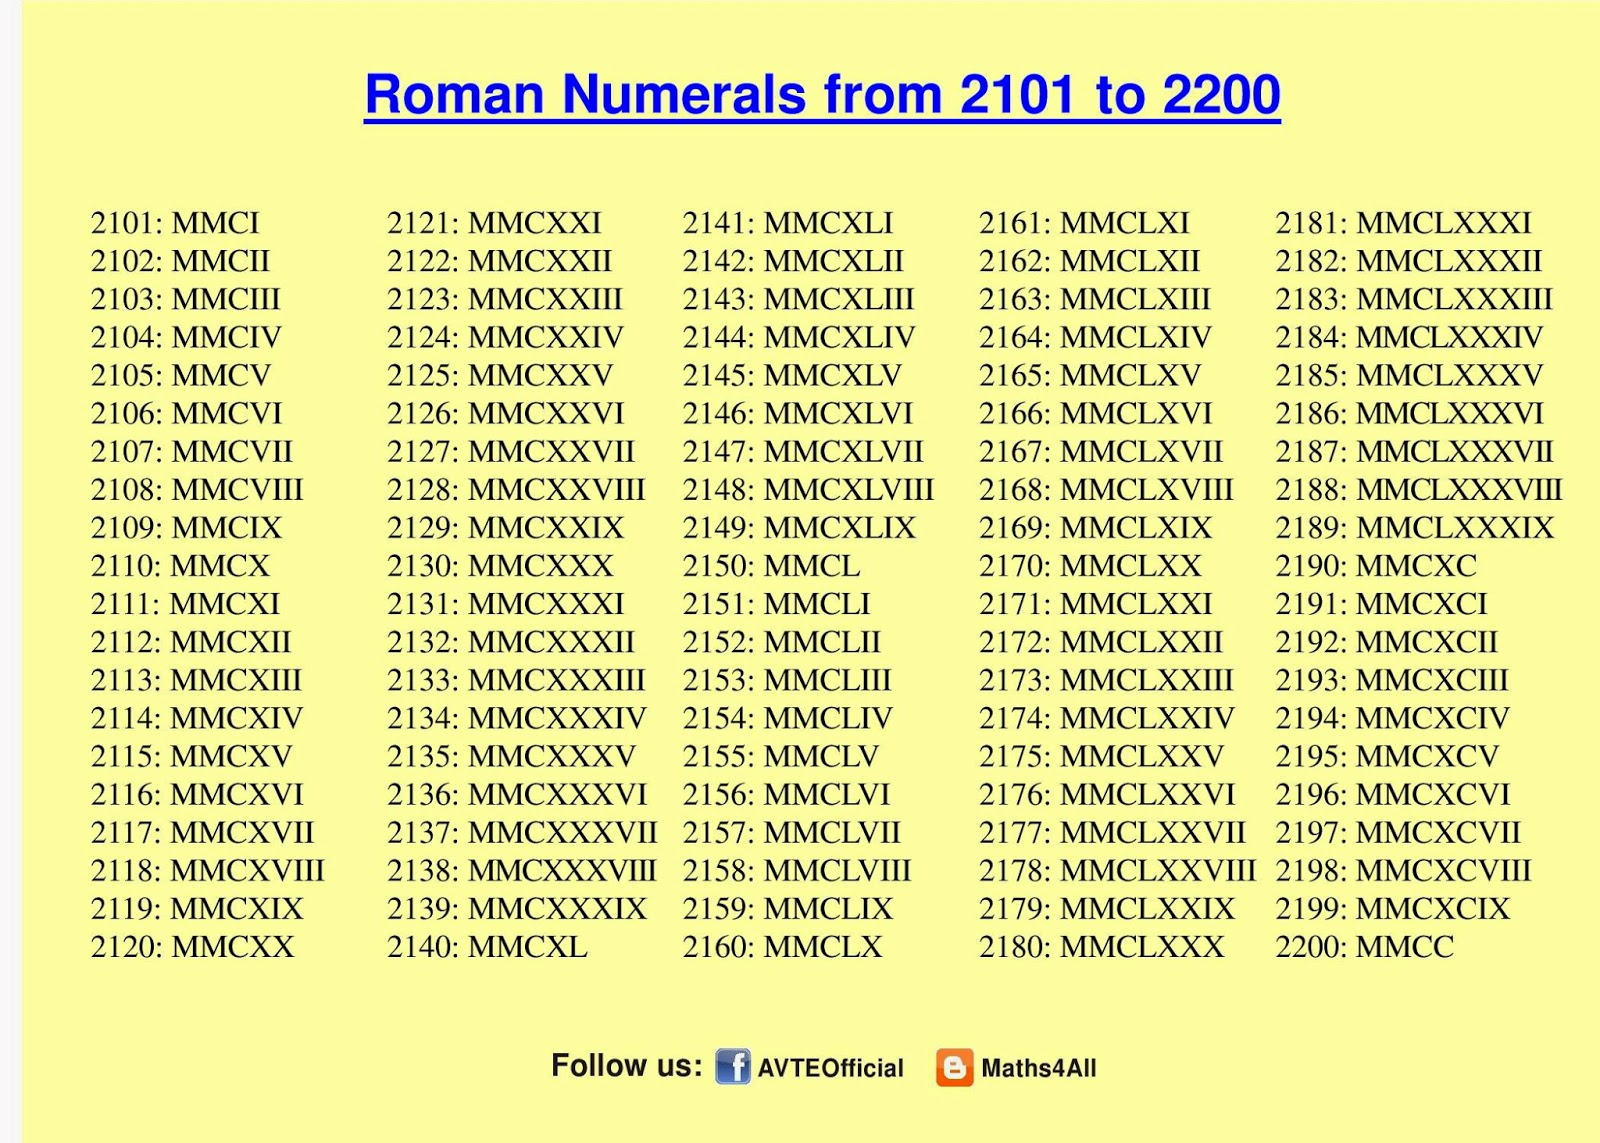 Maths4all ROMAN NUMERALS 2101 TO 2200